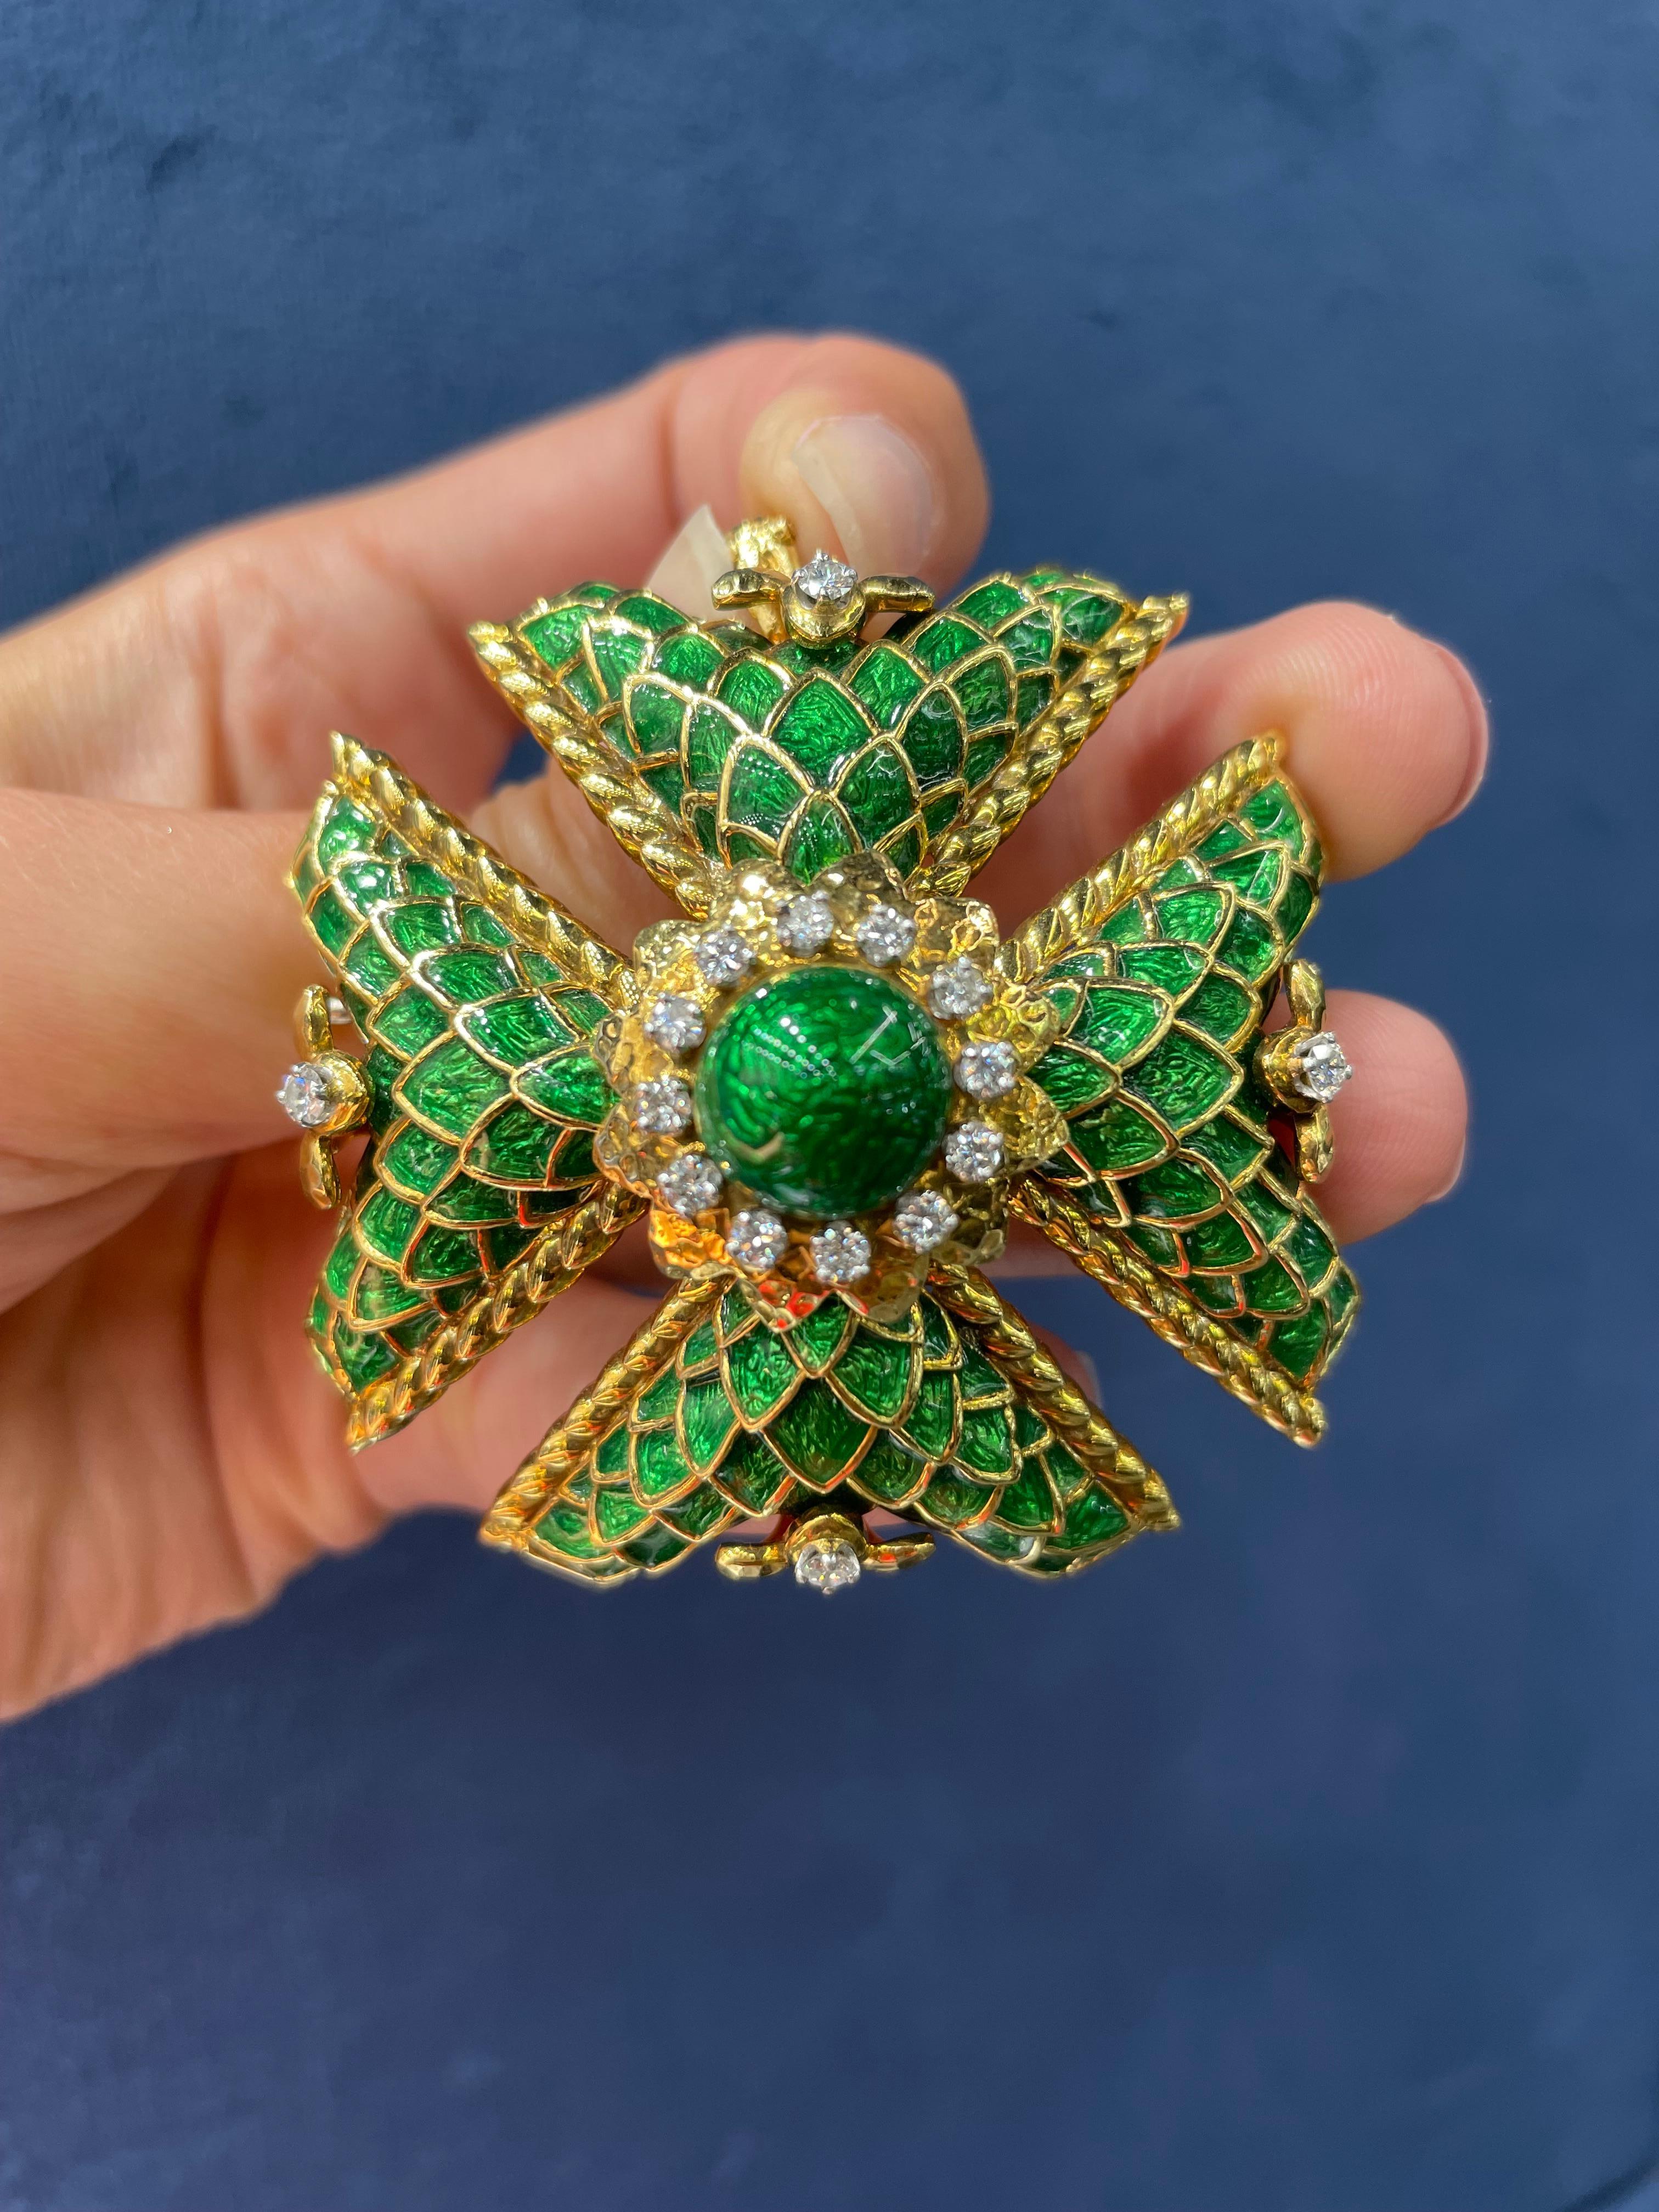 Vintage David Webb diamond & 18K gold large size brooch/pendant. 
The shimmering diamonds weigh approximately 10.50 carats, ranging F to G color and VS clarity. A breath-taking and dazzling piece, this gorgeous brooch deserves someone with